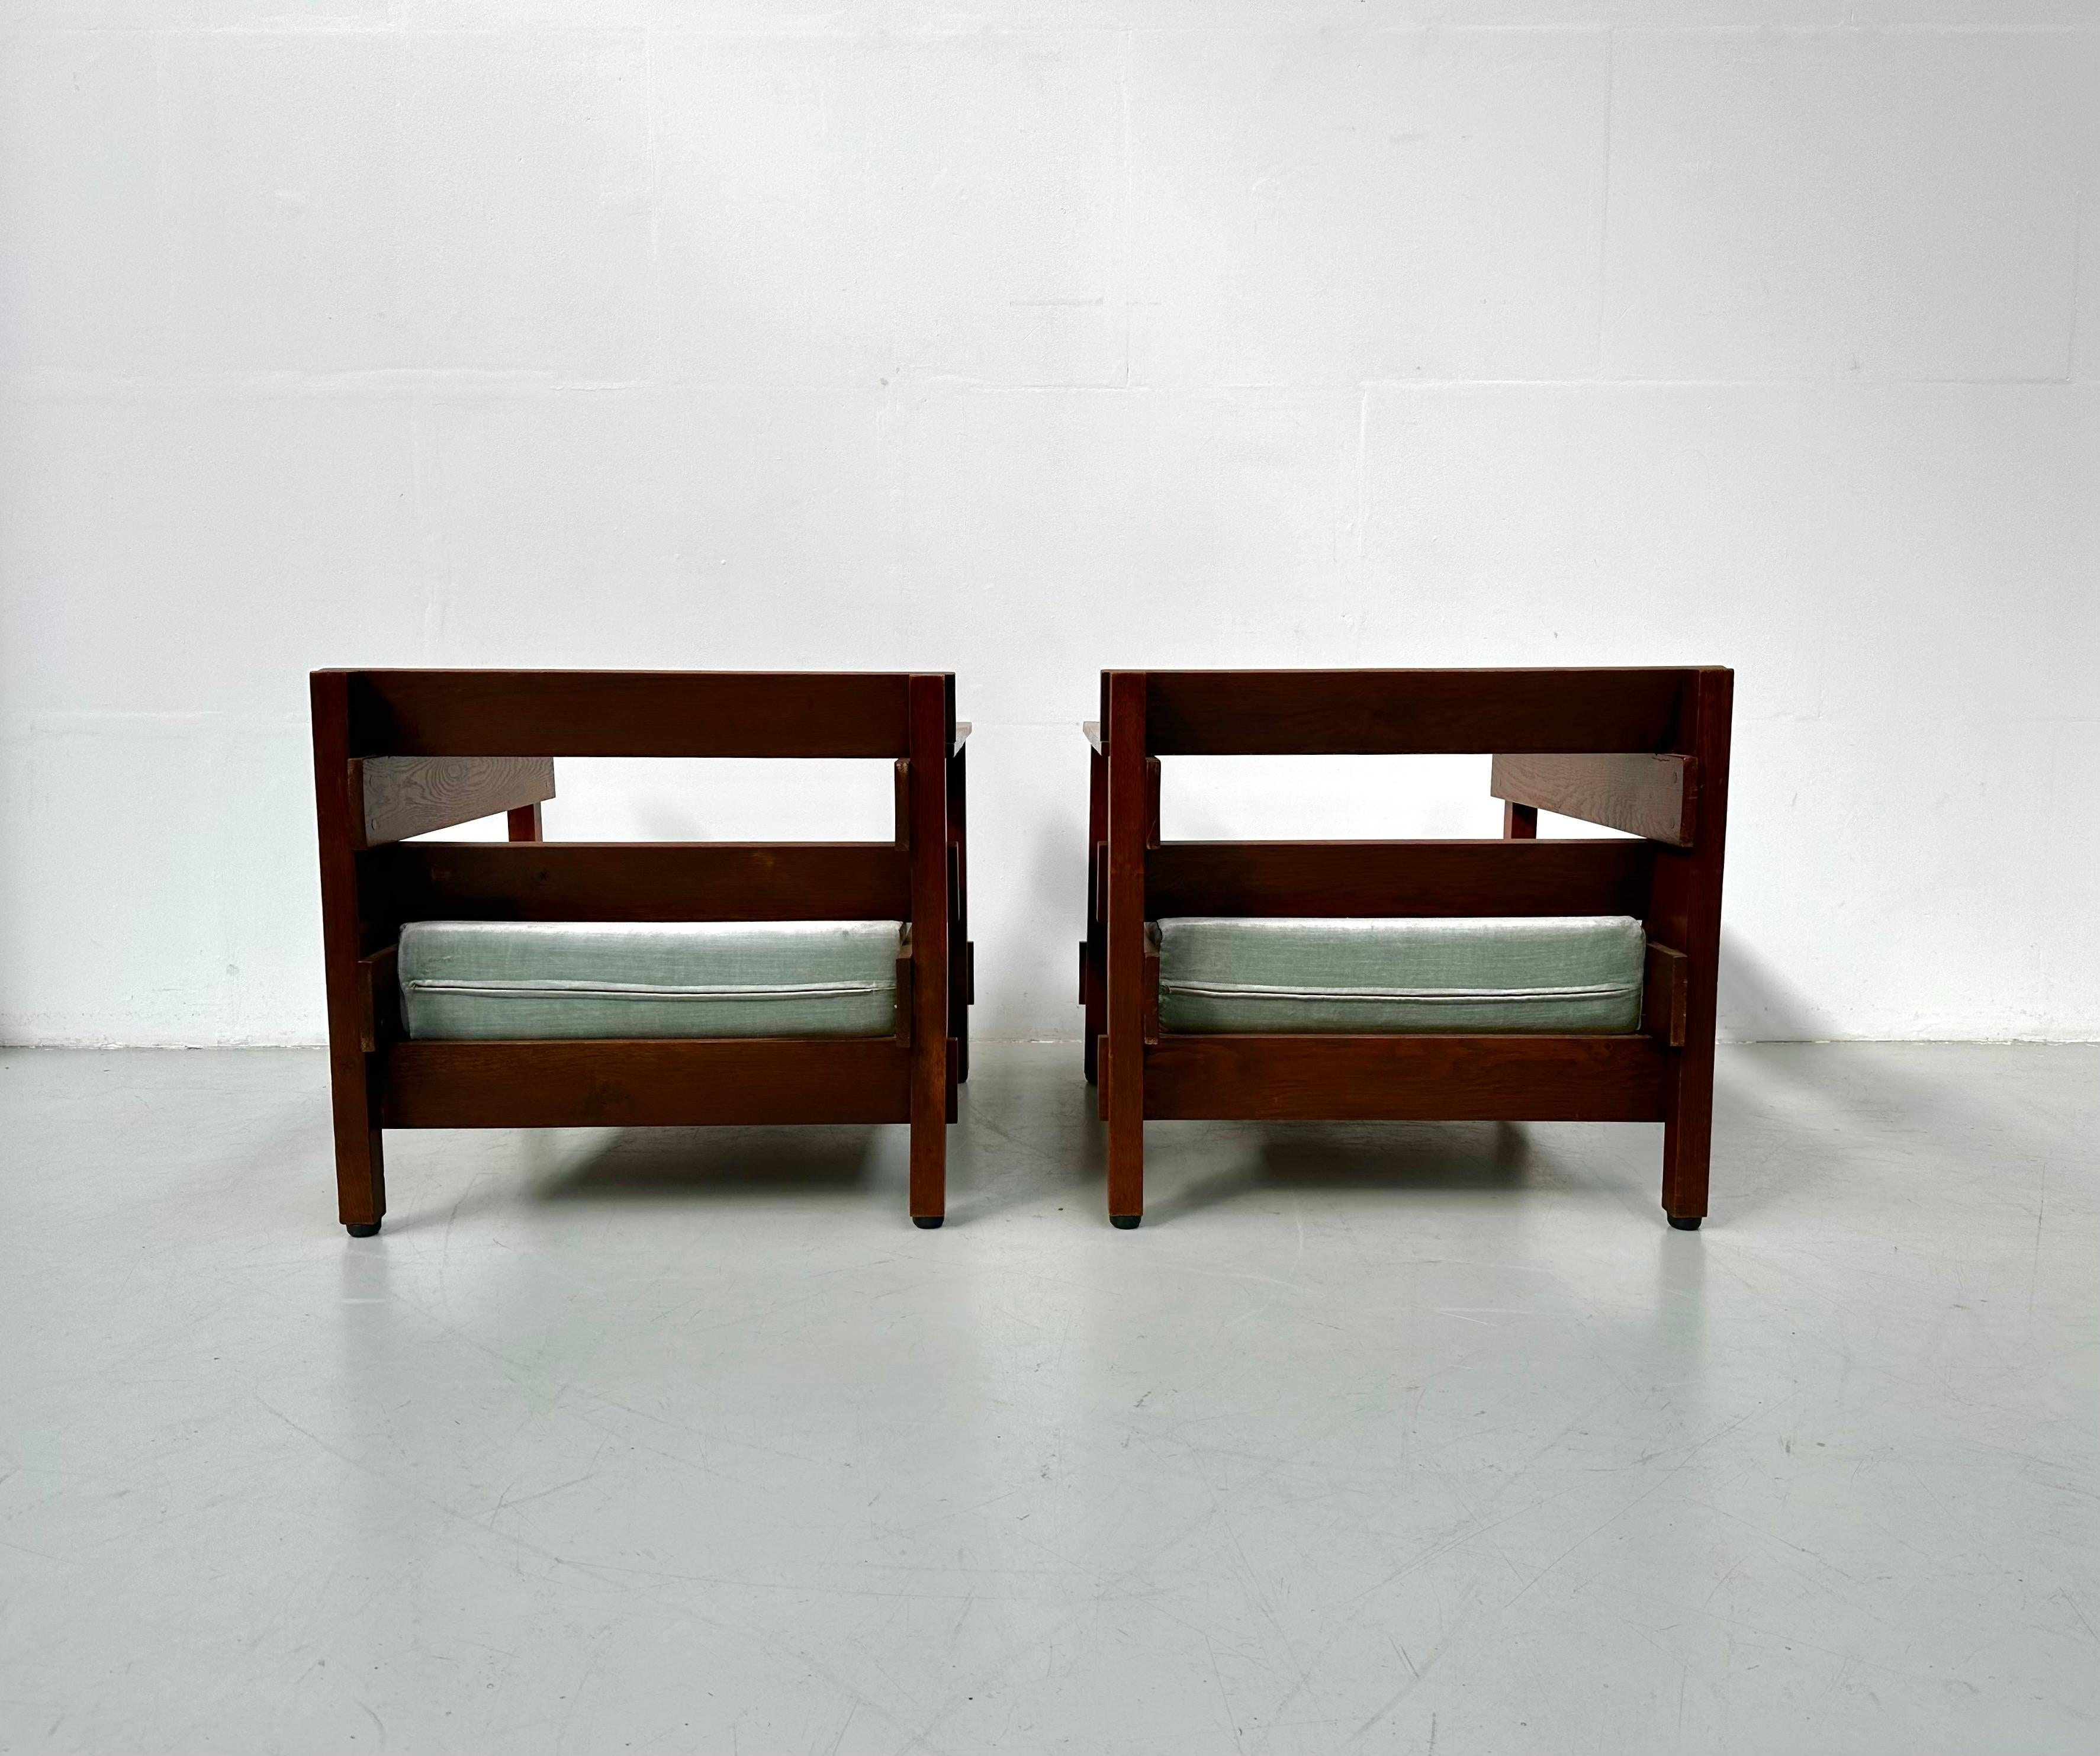 Dutch Mid Century Brutalist Oak Armchairs by Paul Bromberg for Metz & Co, 1950s. 5